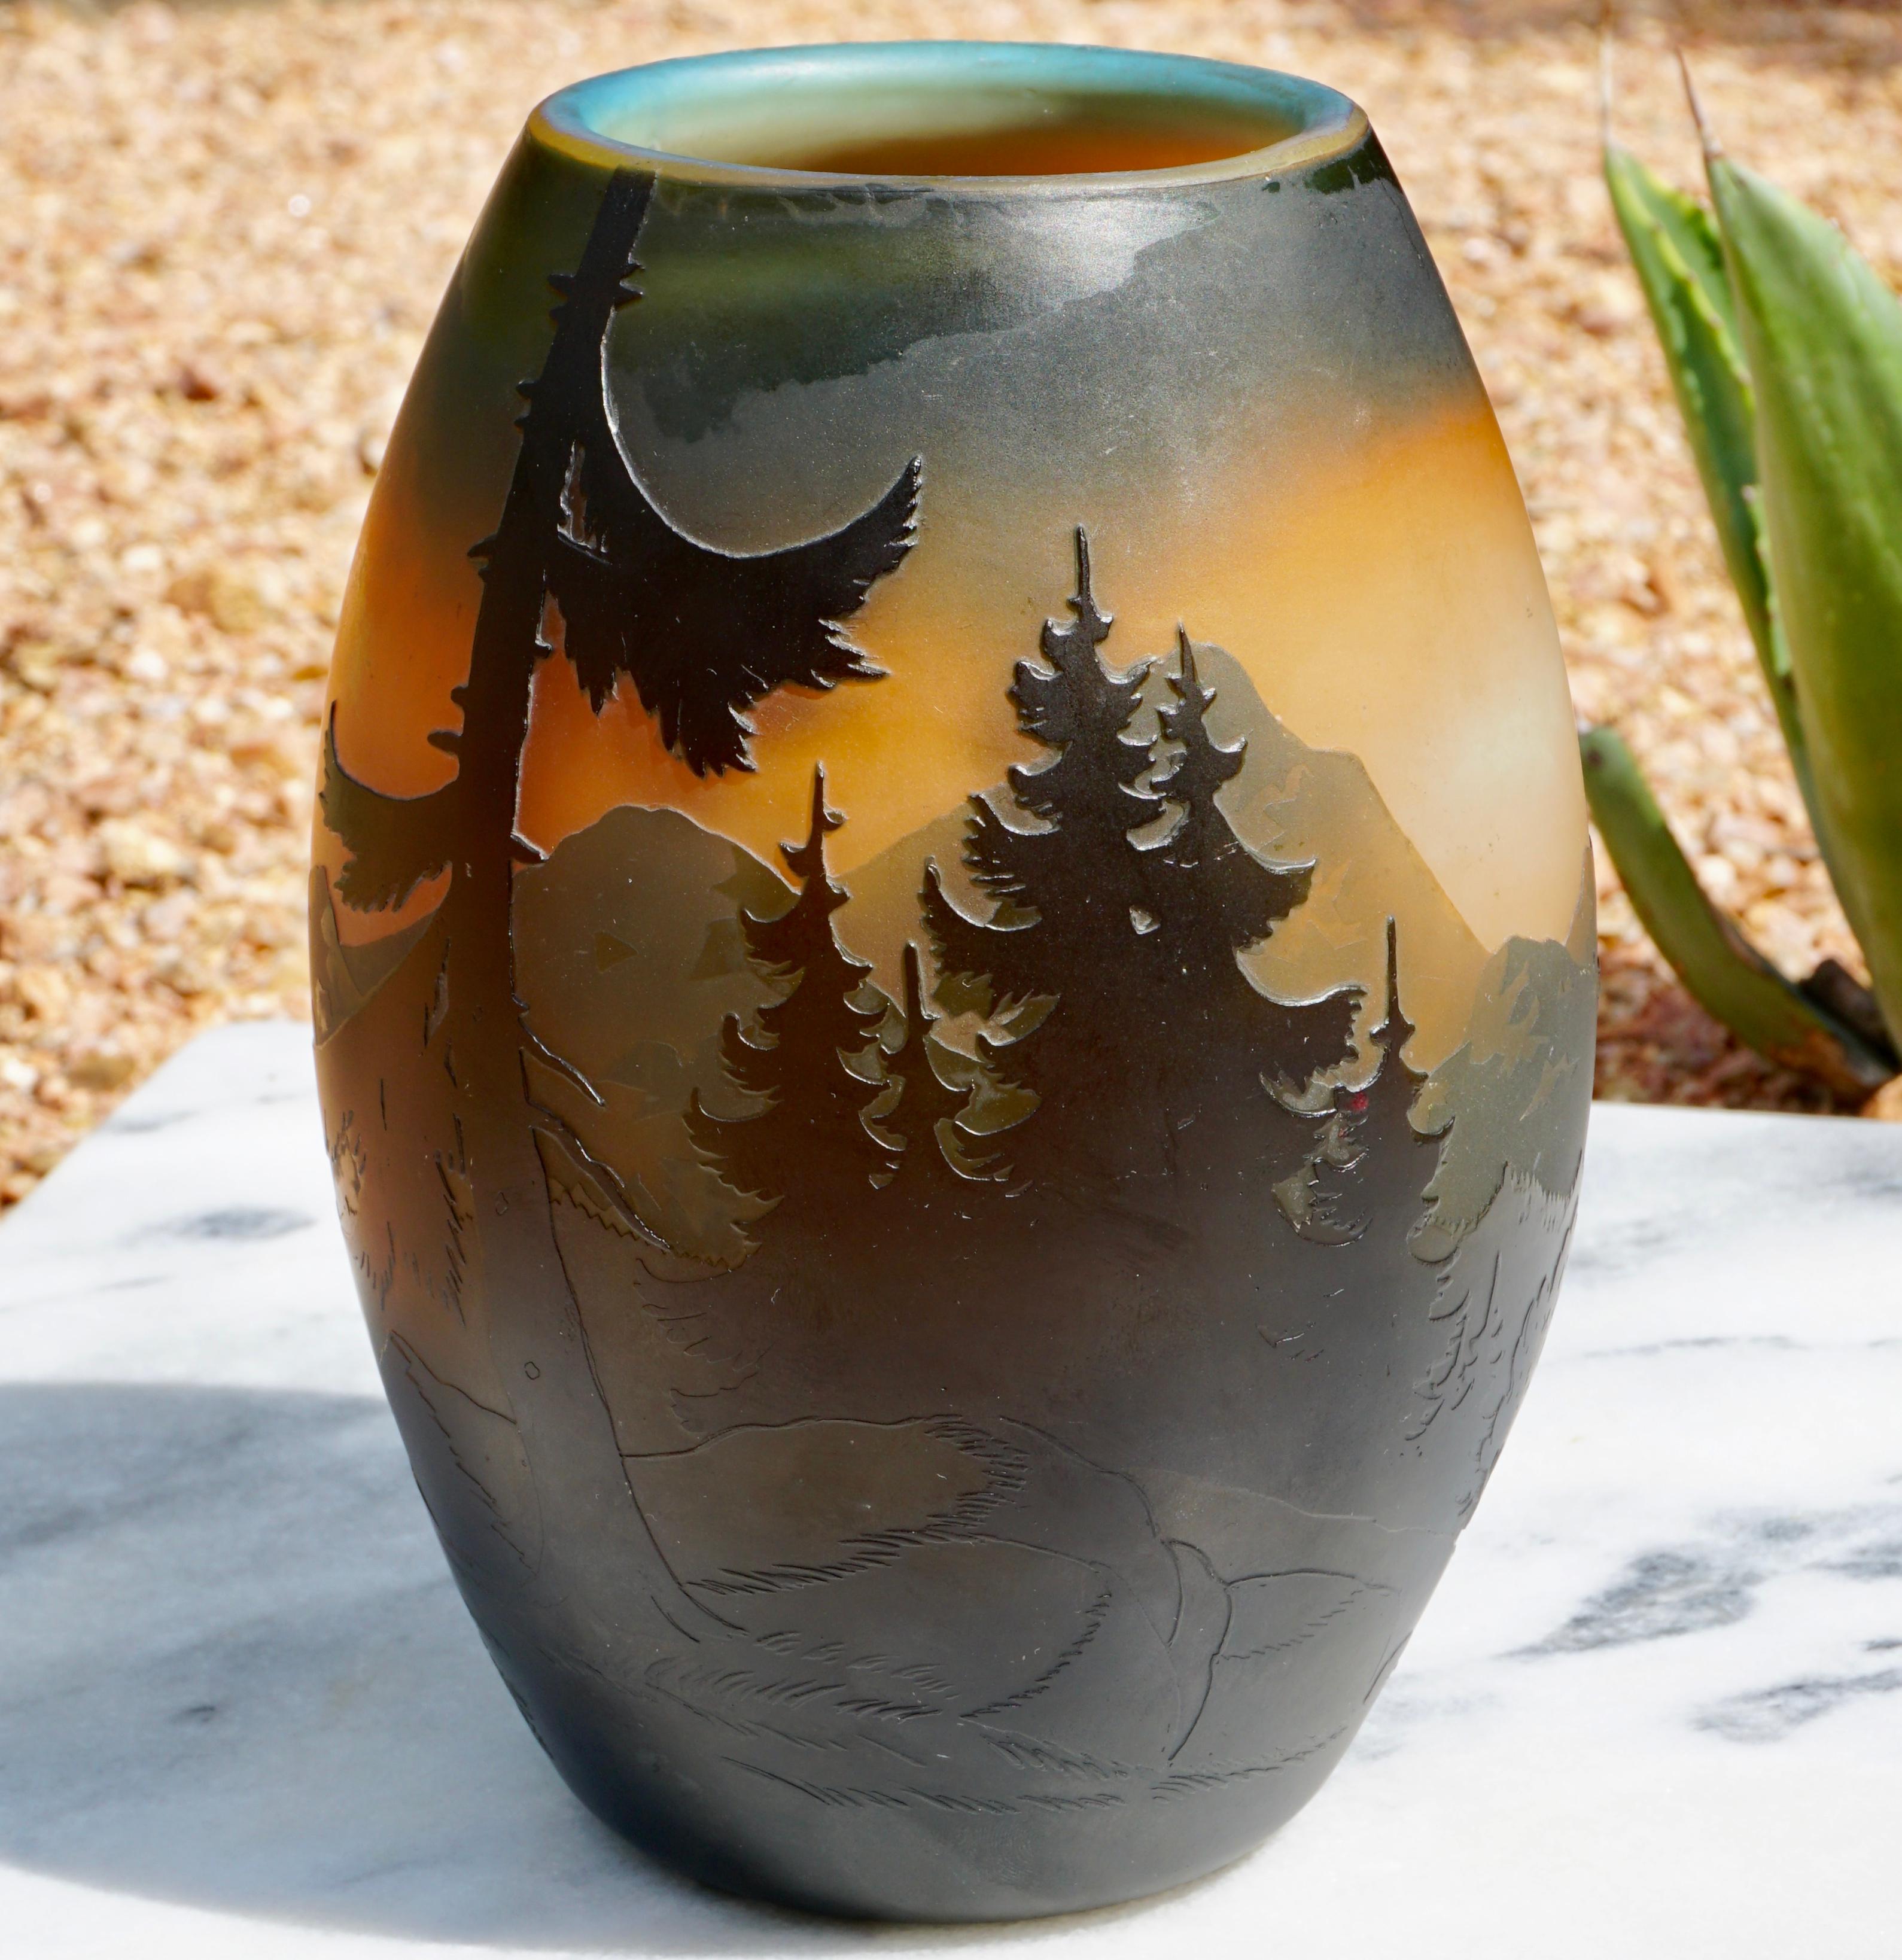 Muller Frères Luneville cameo mountain landscape vase, circa 1915. Art Nouveau - Art Deco cameo art glass wheel carved and acid etched vase with layers of evergreens and mountains in the background.

Measures: Height 7.75 inches
Diameter 5.25